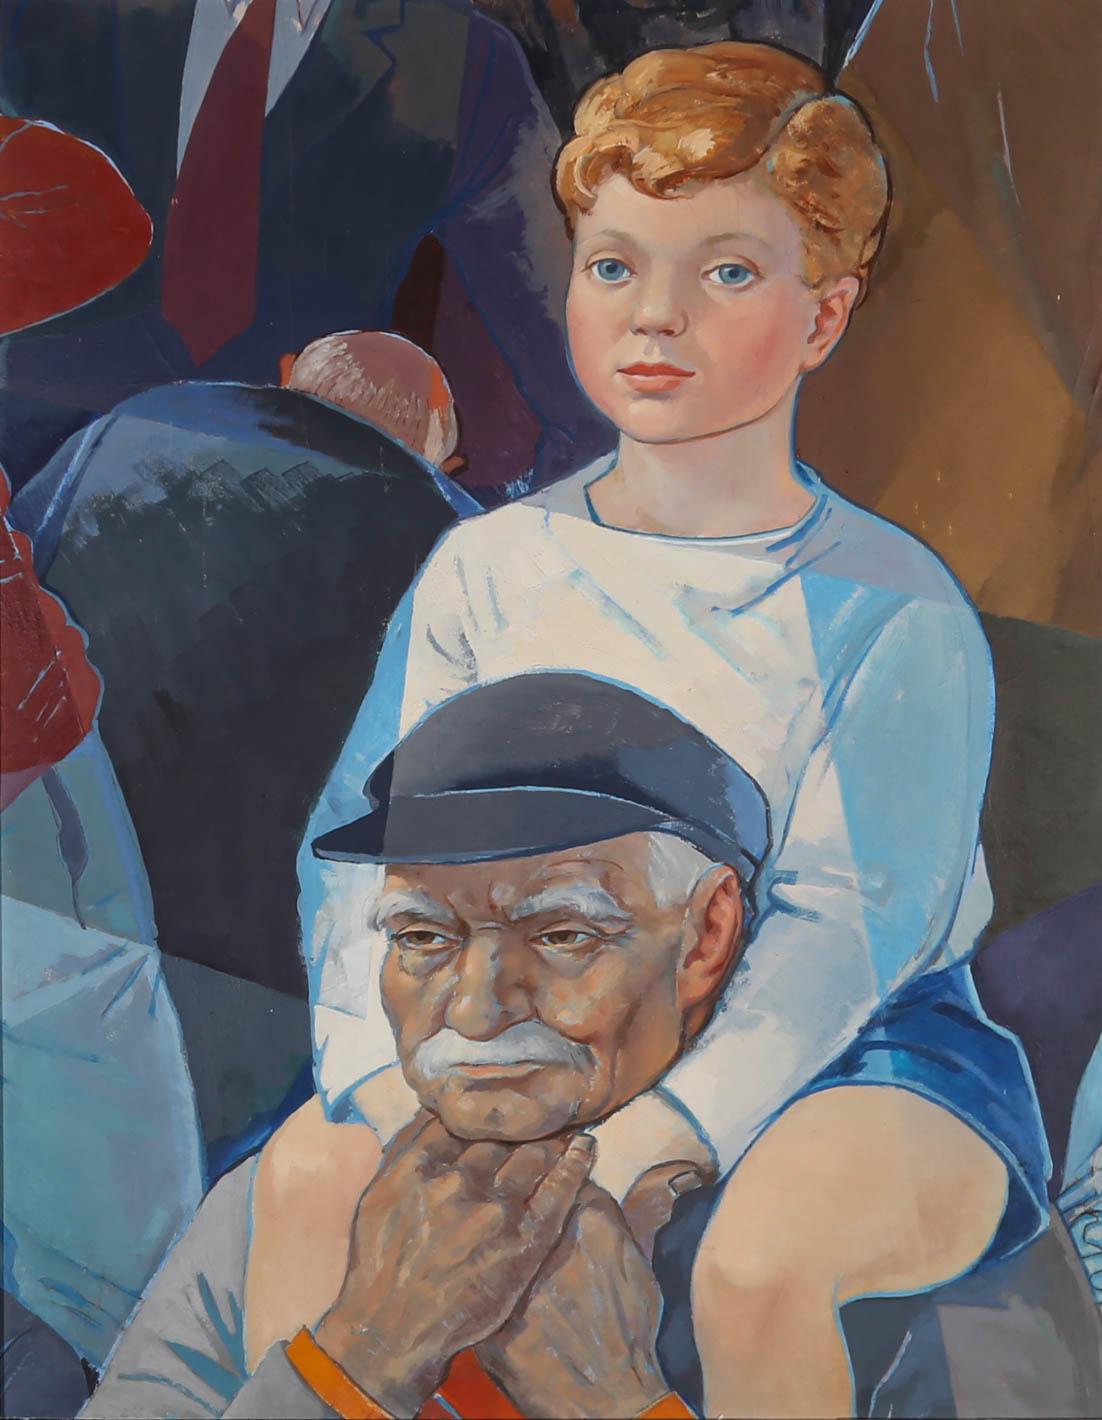 This visually appealing portrait of a young boy atop his grandfather's shoulders is wonderfully crafted. The blue colour palette is contrasted by flashes of orange hidden amongst the composition, creating a bold and modern study. The kindly face of